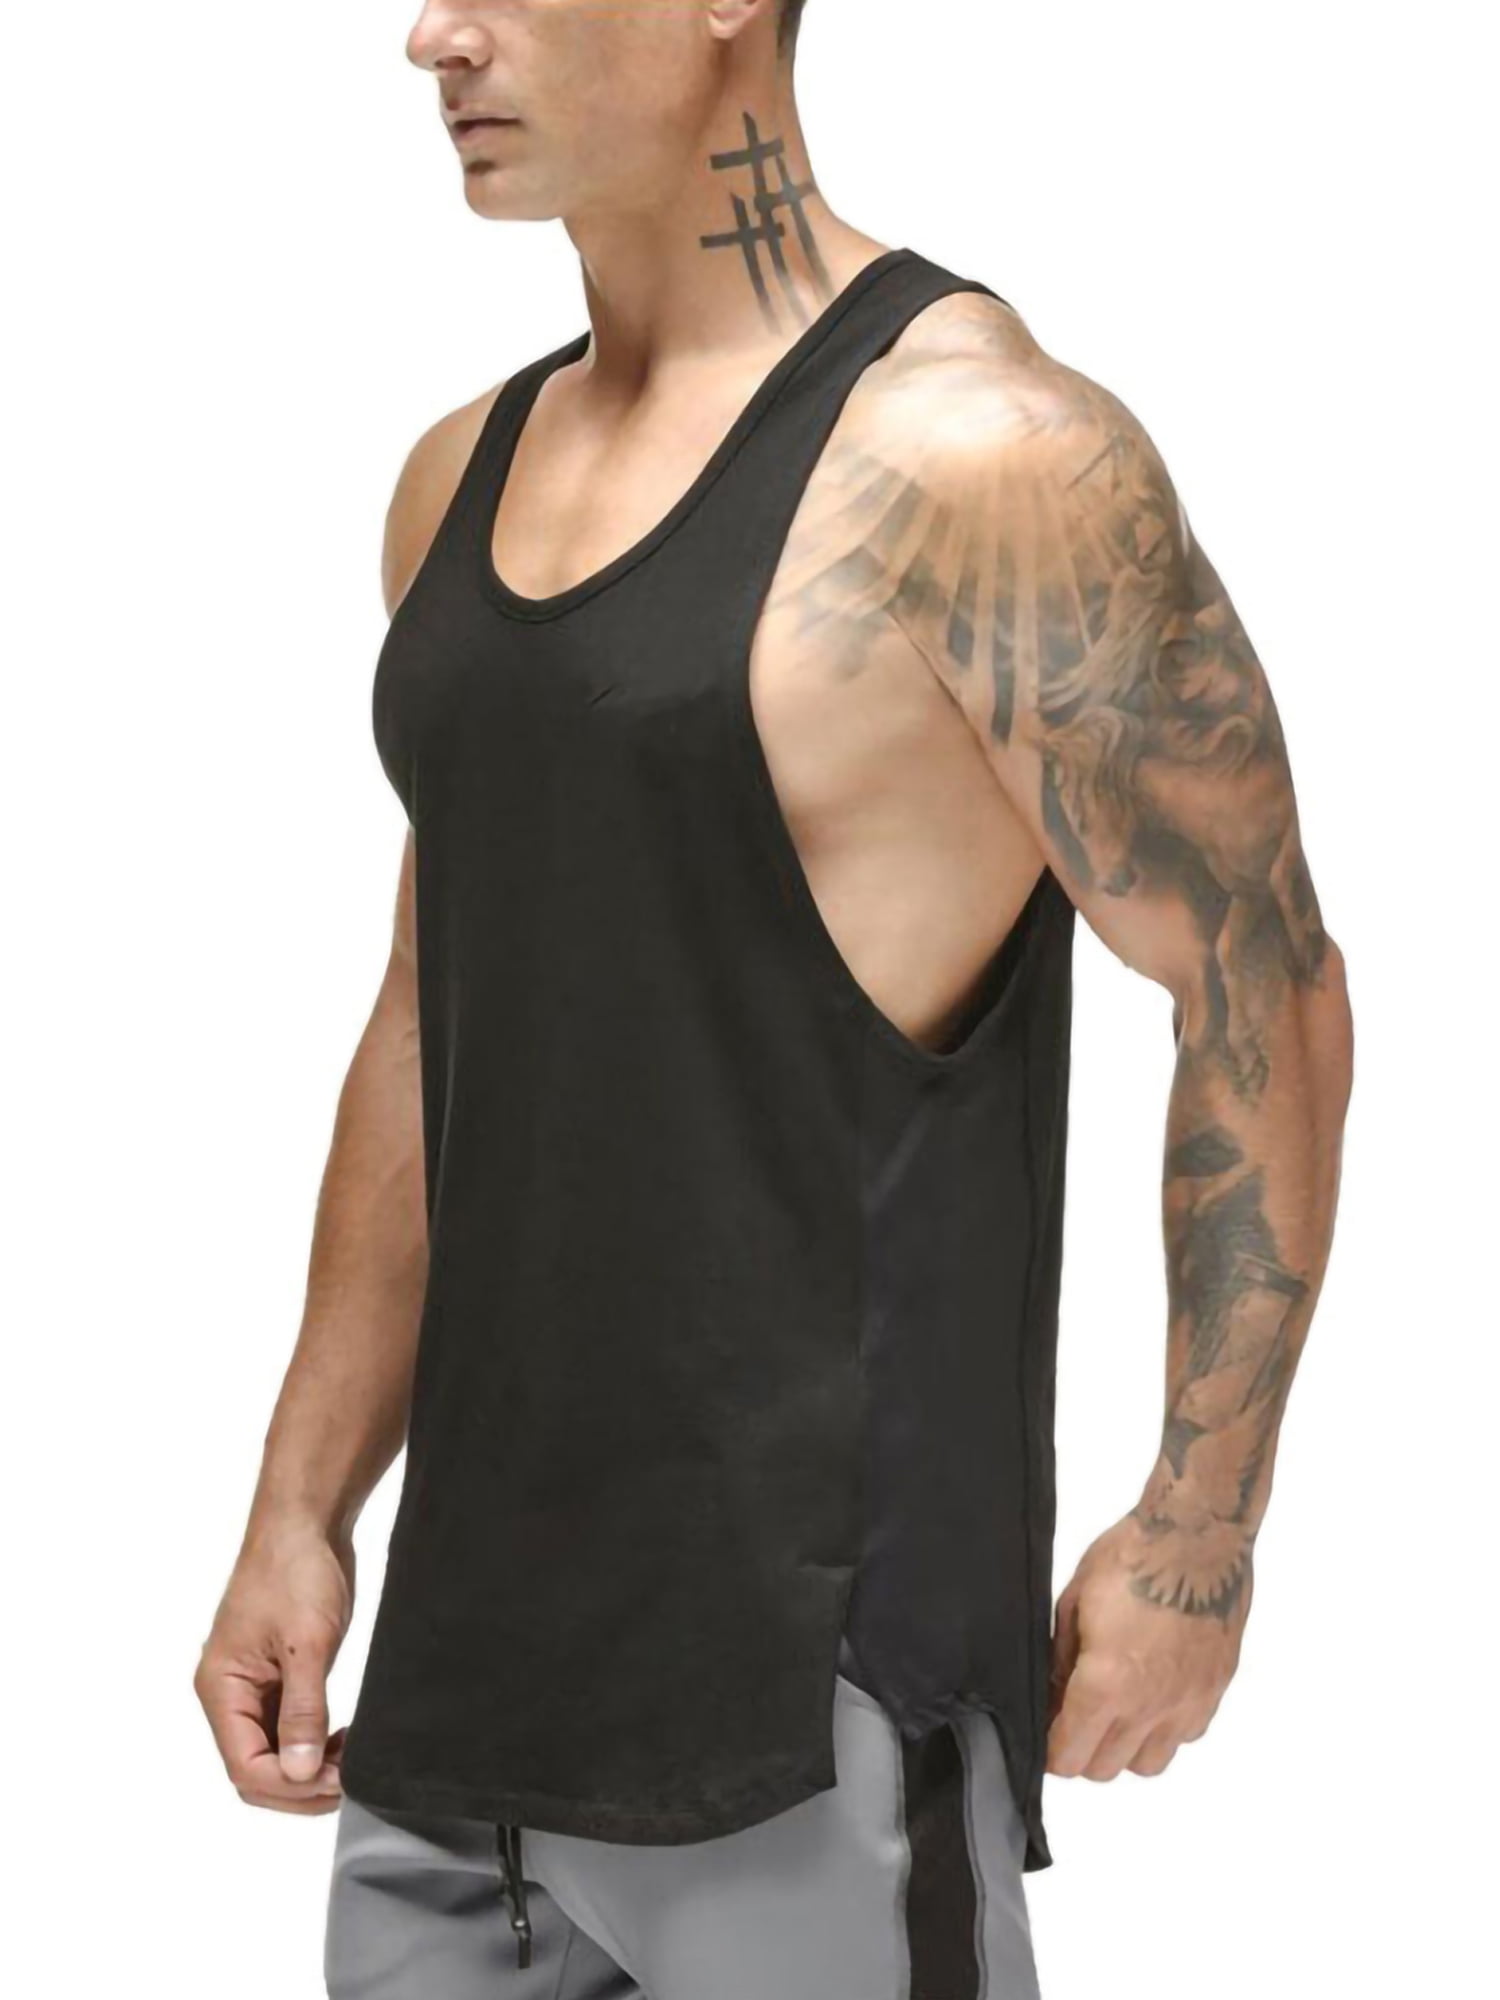 Men Bodybuilding Sports Tank Top Fitness Loose Vest Shirts Gym Workout Tee Tops 